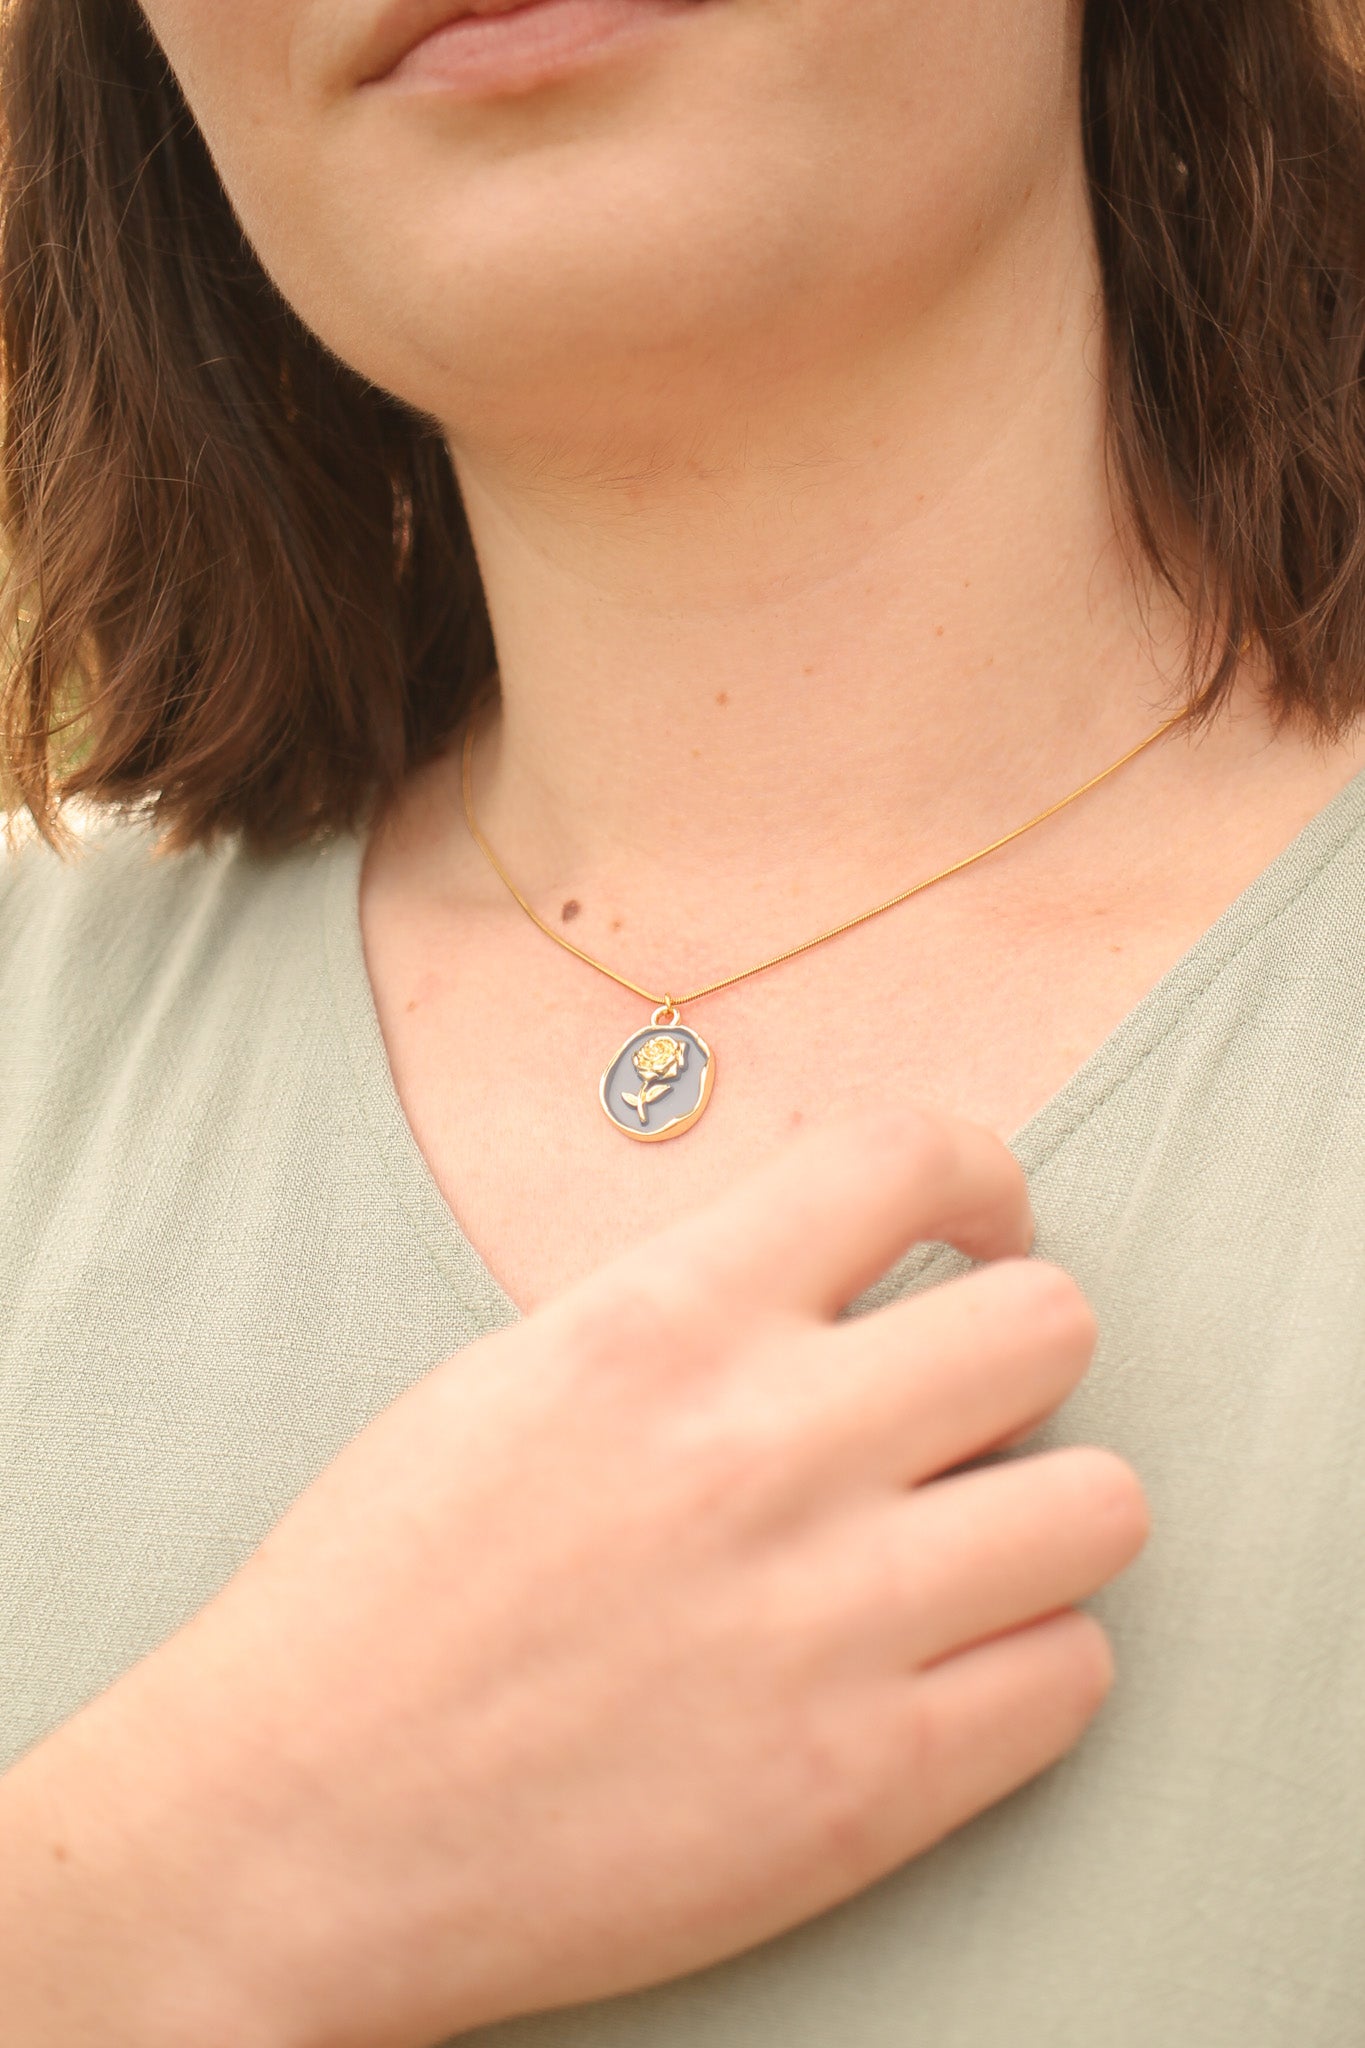 Colette Necklace in Dusty Blue